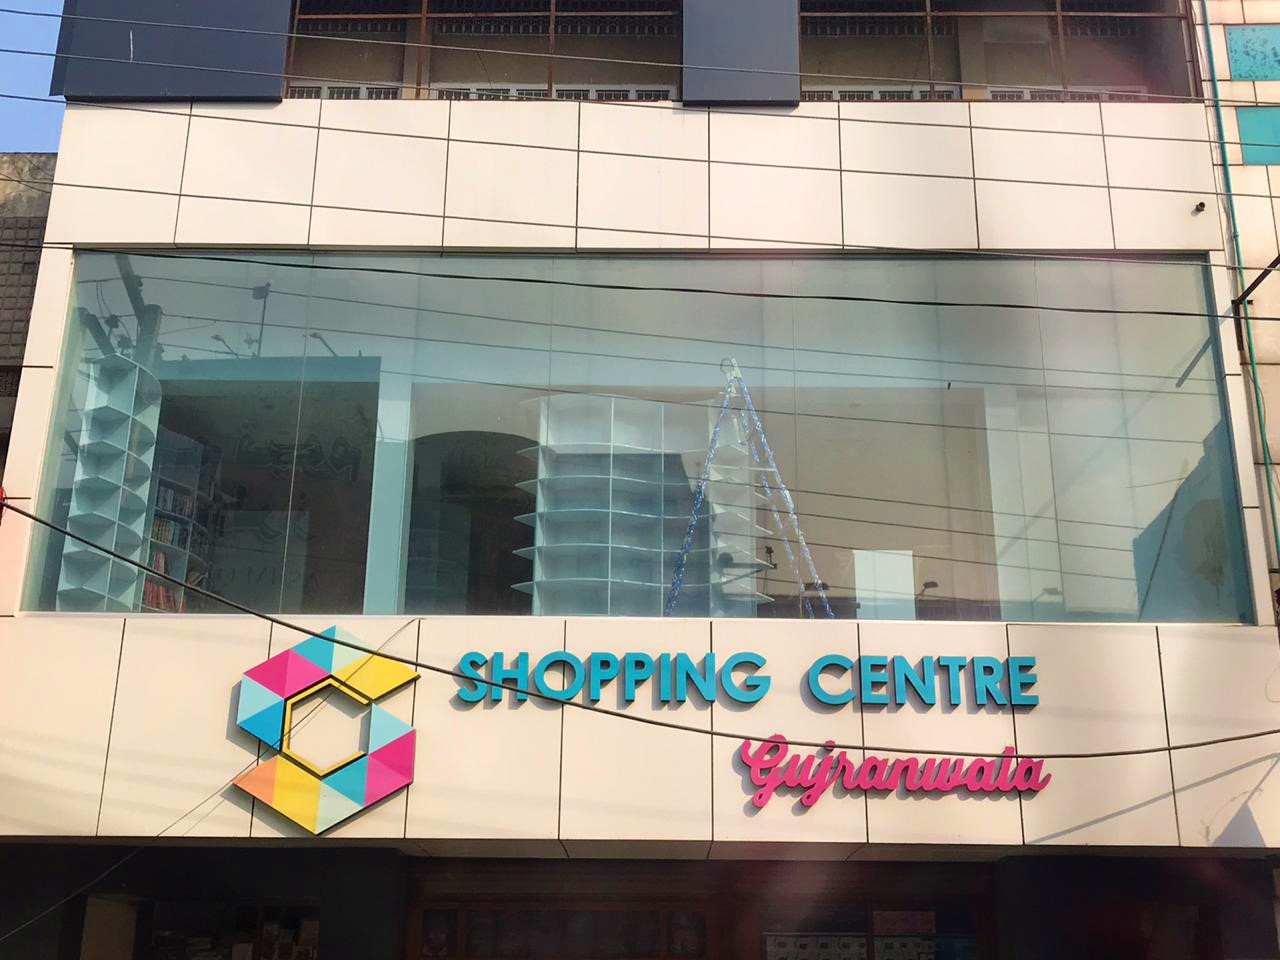 Gujranwala Shopping Center with SolarScreen products